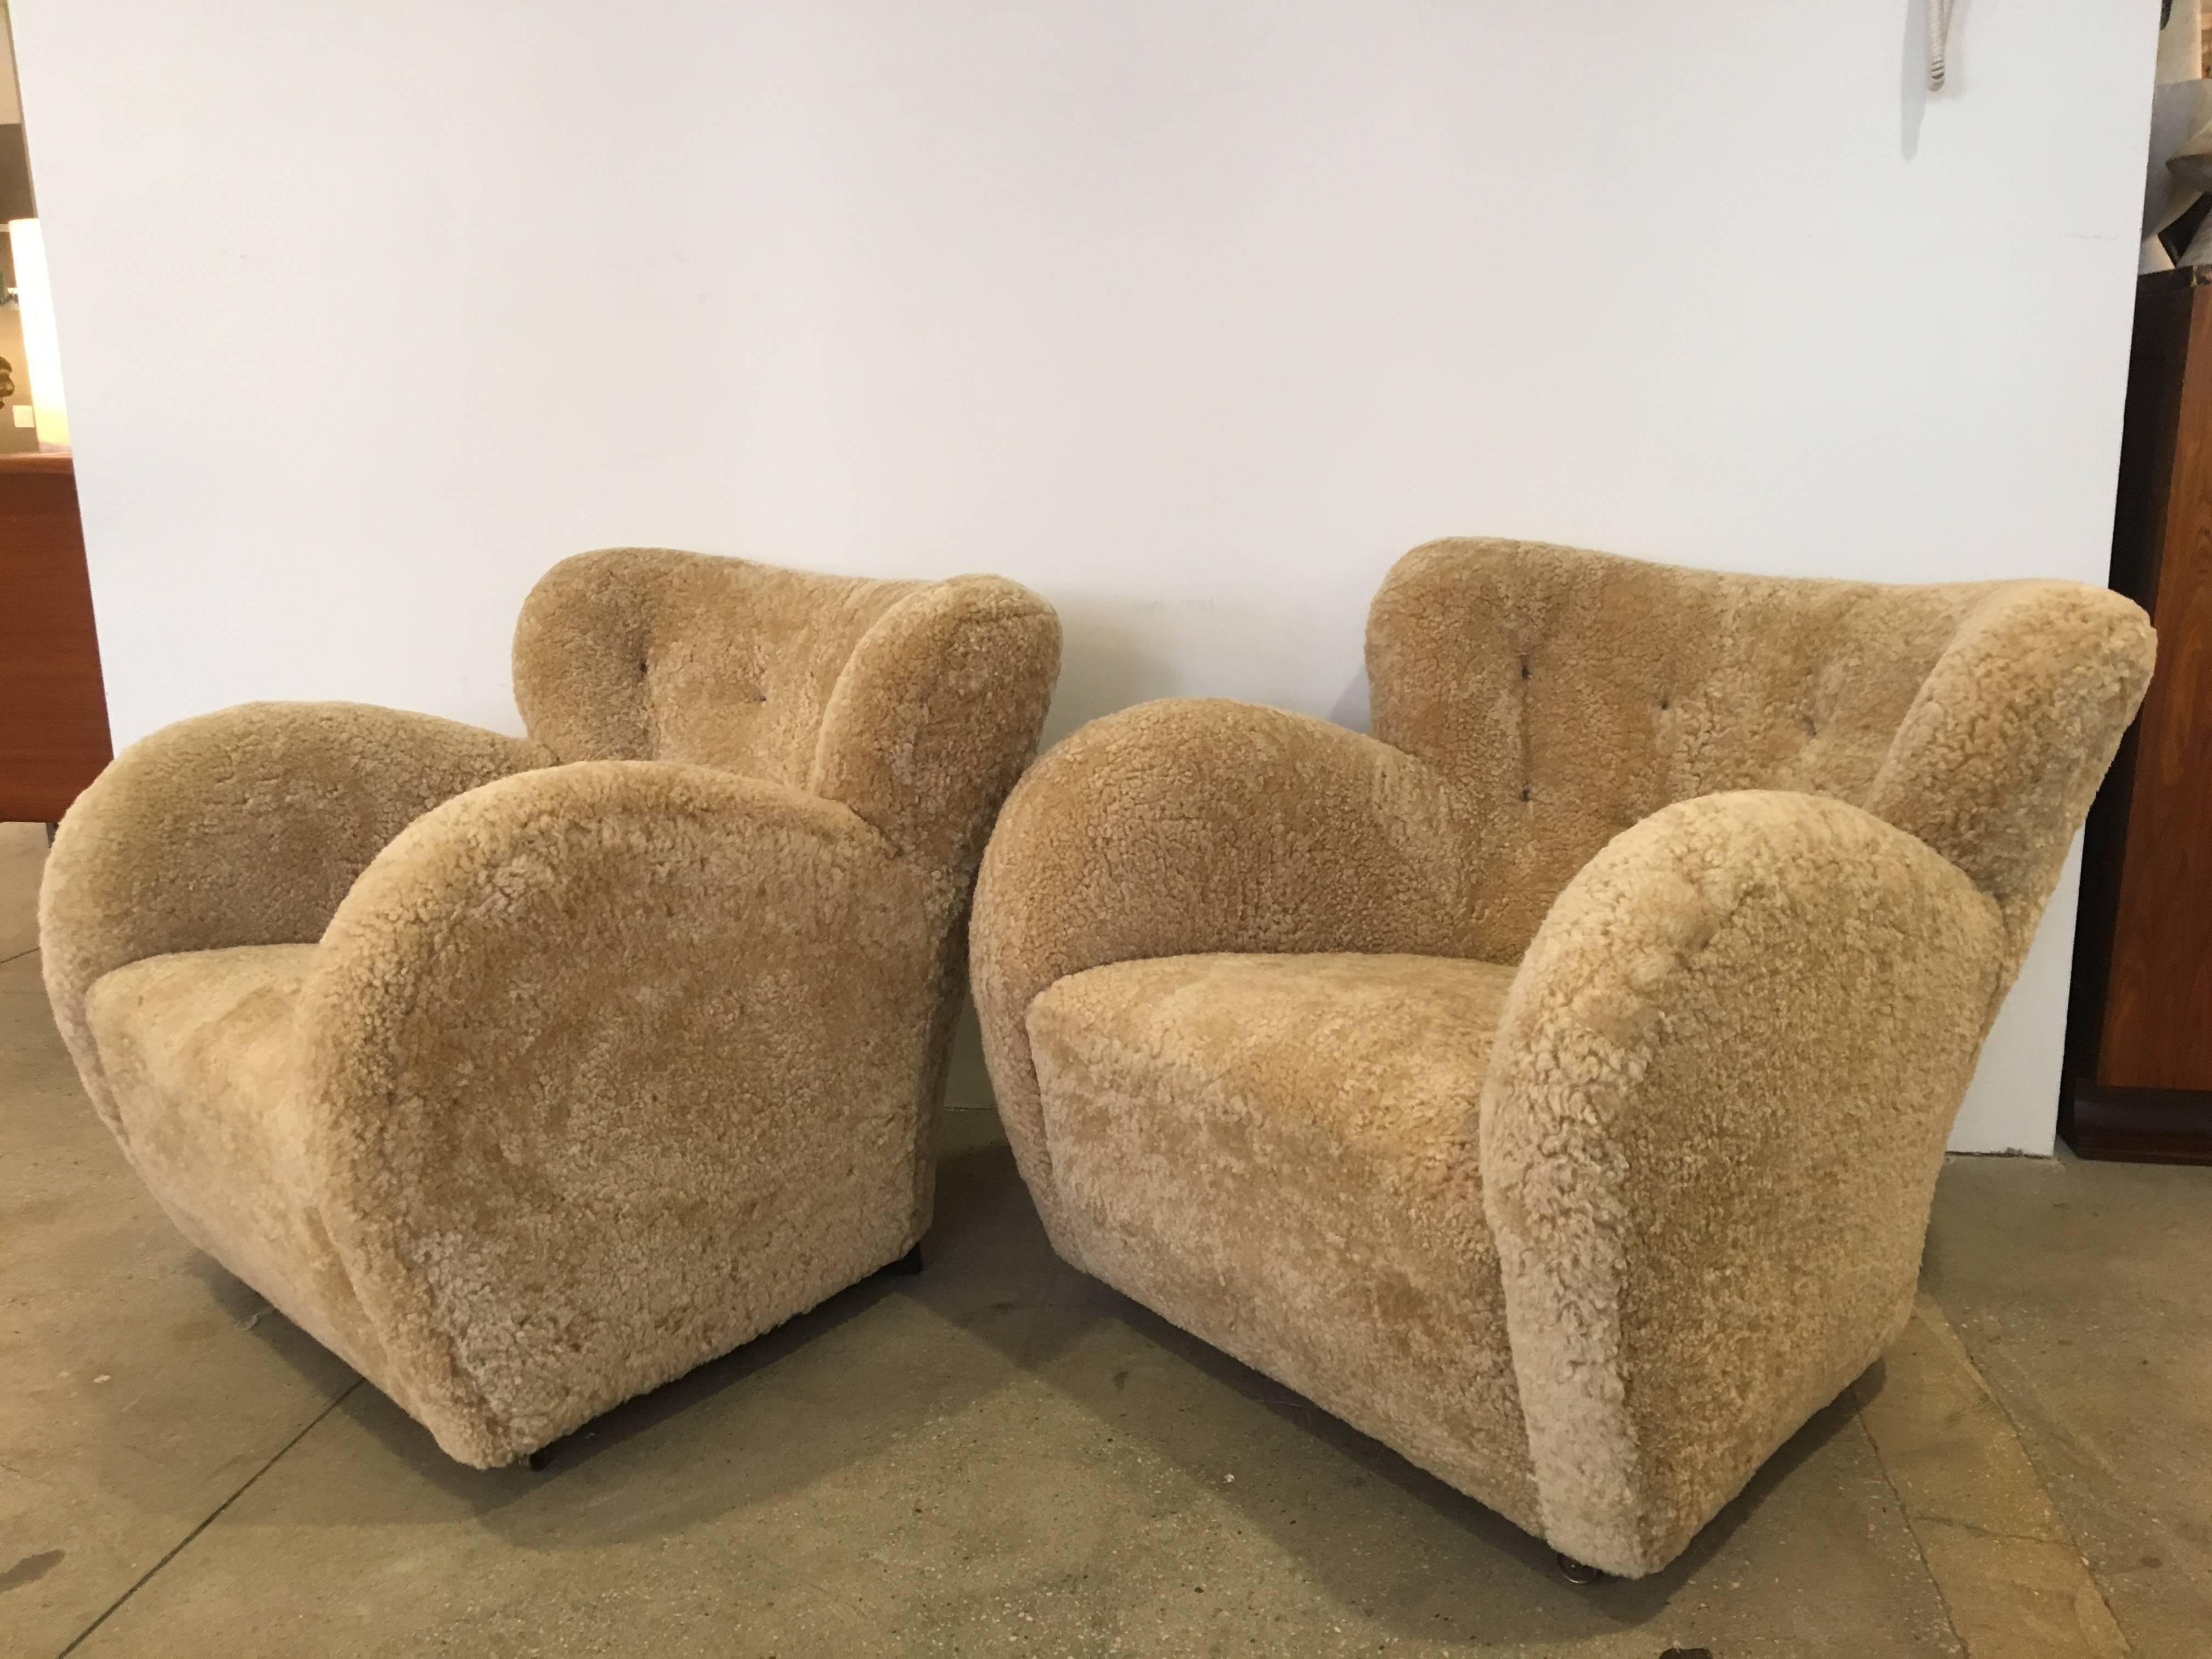 Pair of shapely Flemming Lassen lounge chairs, from the 1940s, recently upholstered in shearling sheep hides.
Original castors present.
Extreme comfort and style.